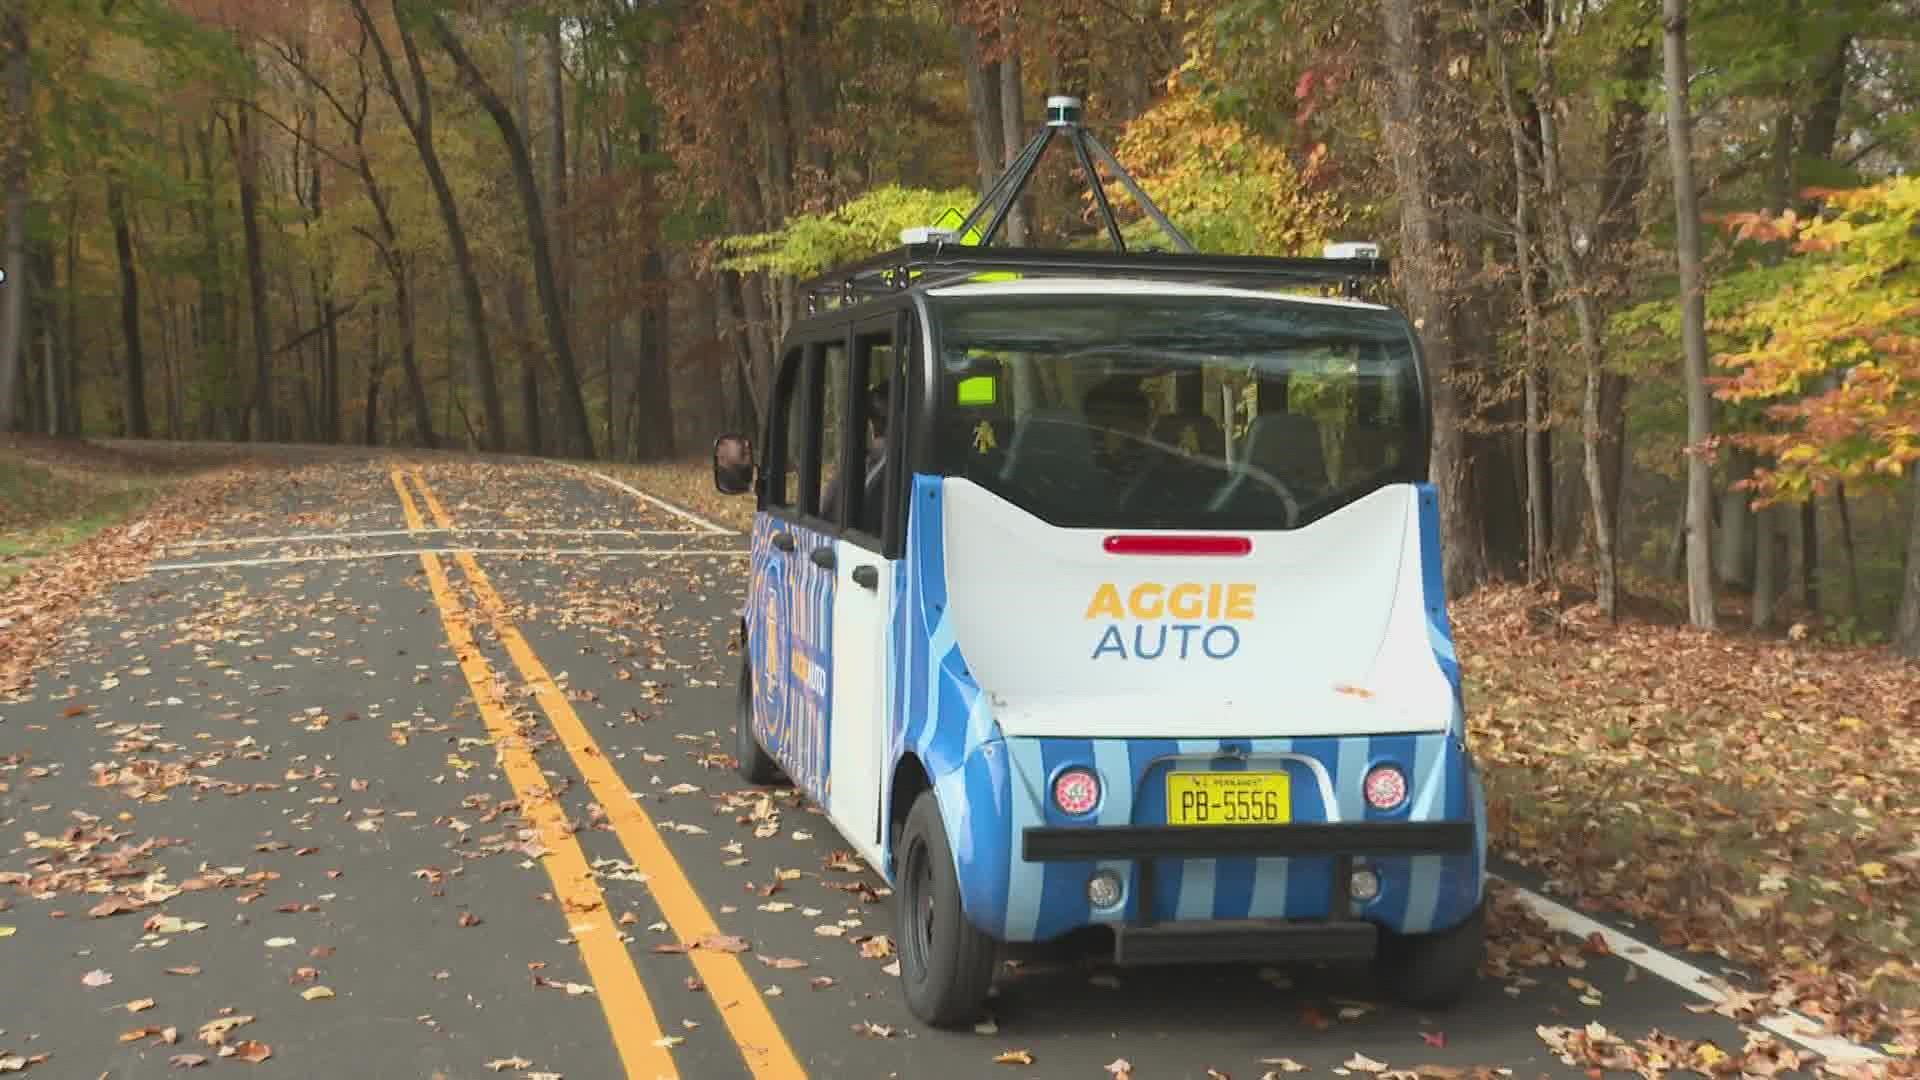 North Carolina A&T introduced their plans to have self-driving shuttles by spring 2023.